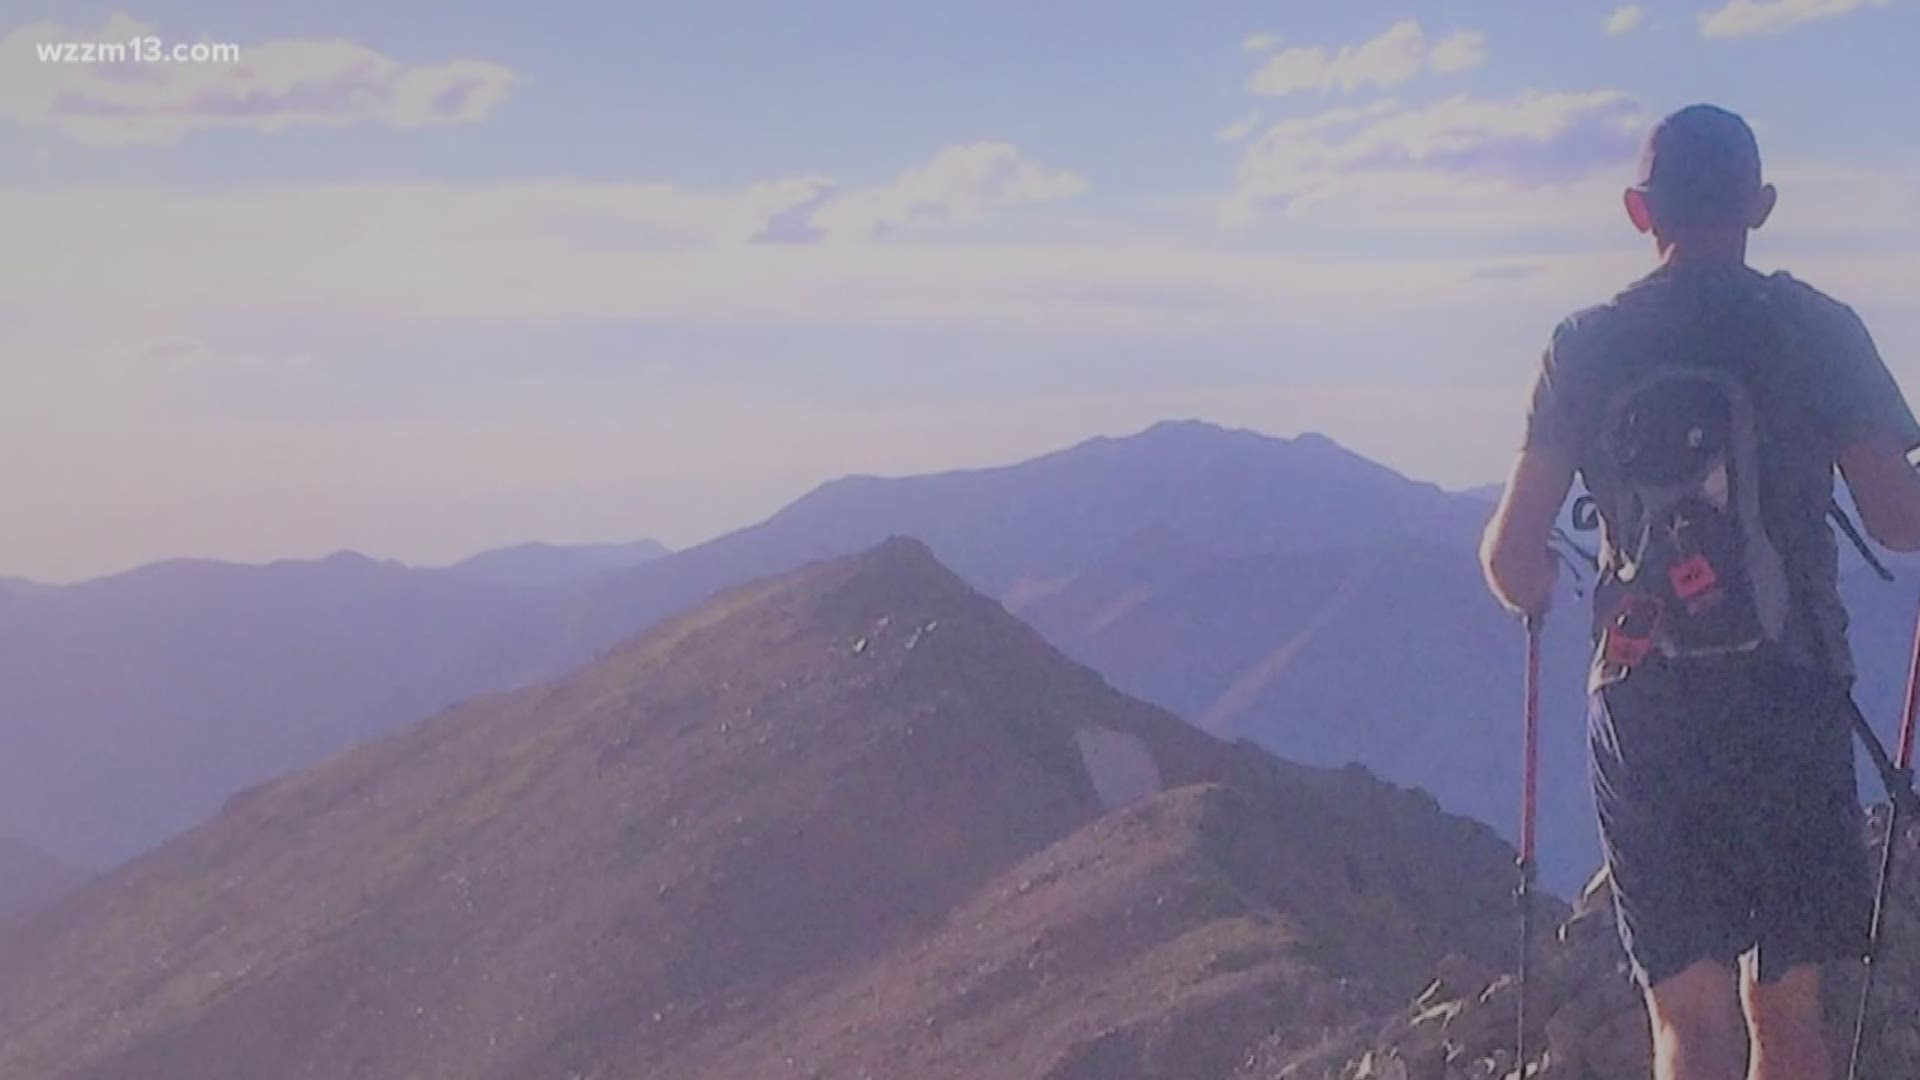 Grand Rapids man climbs 10 mountains in one day